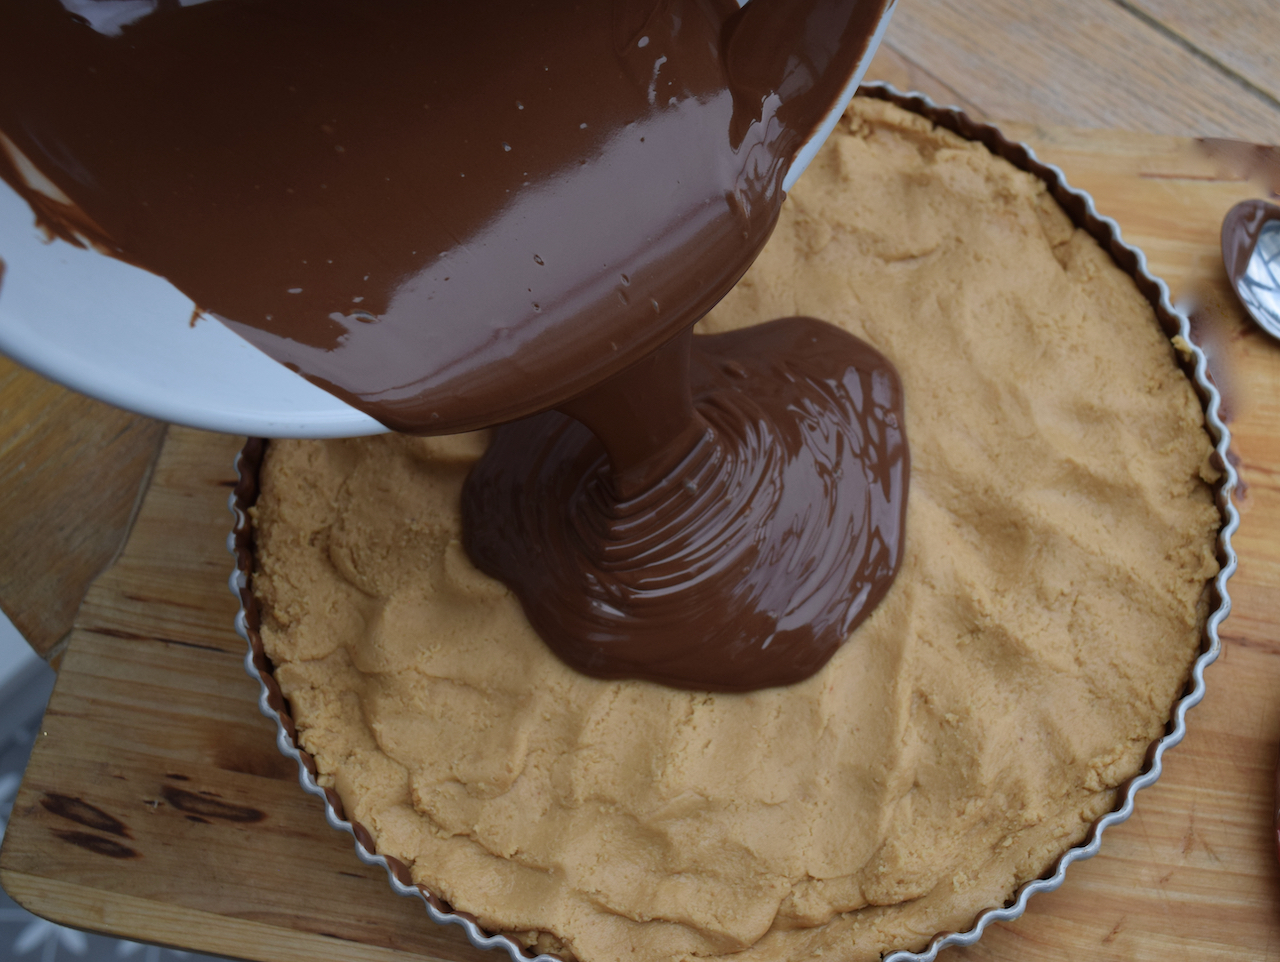 Giant Peanut Butter Cup recipe from Lucy Loves Food Blog